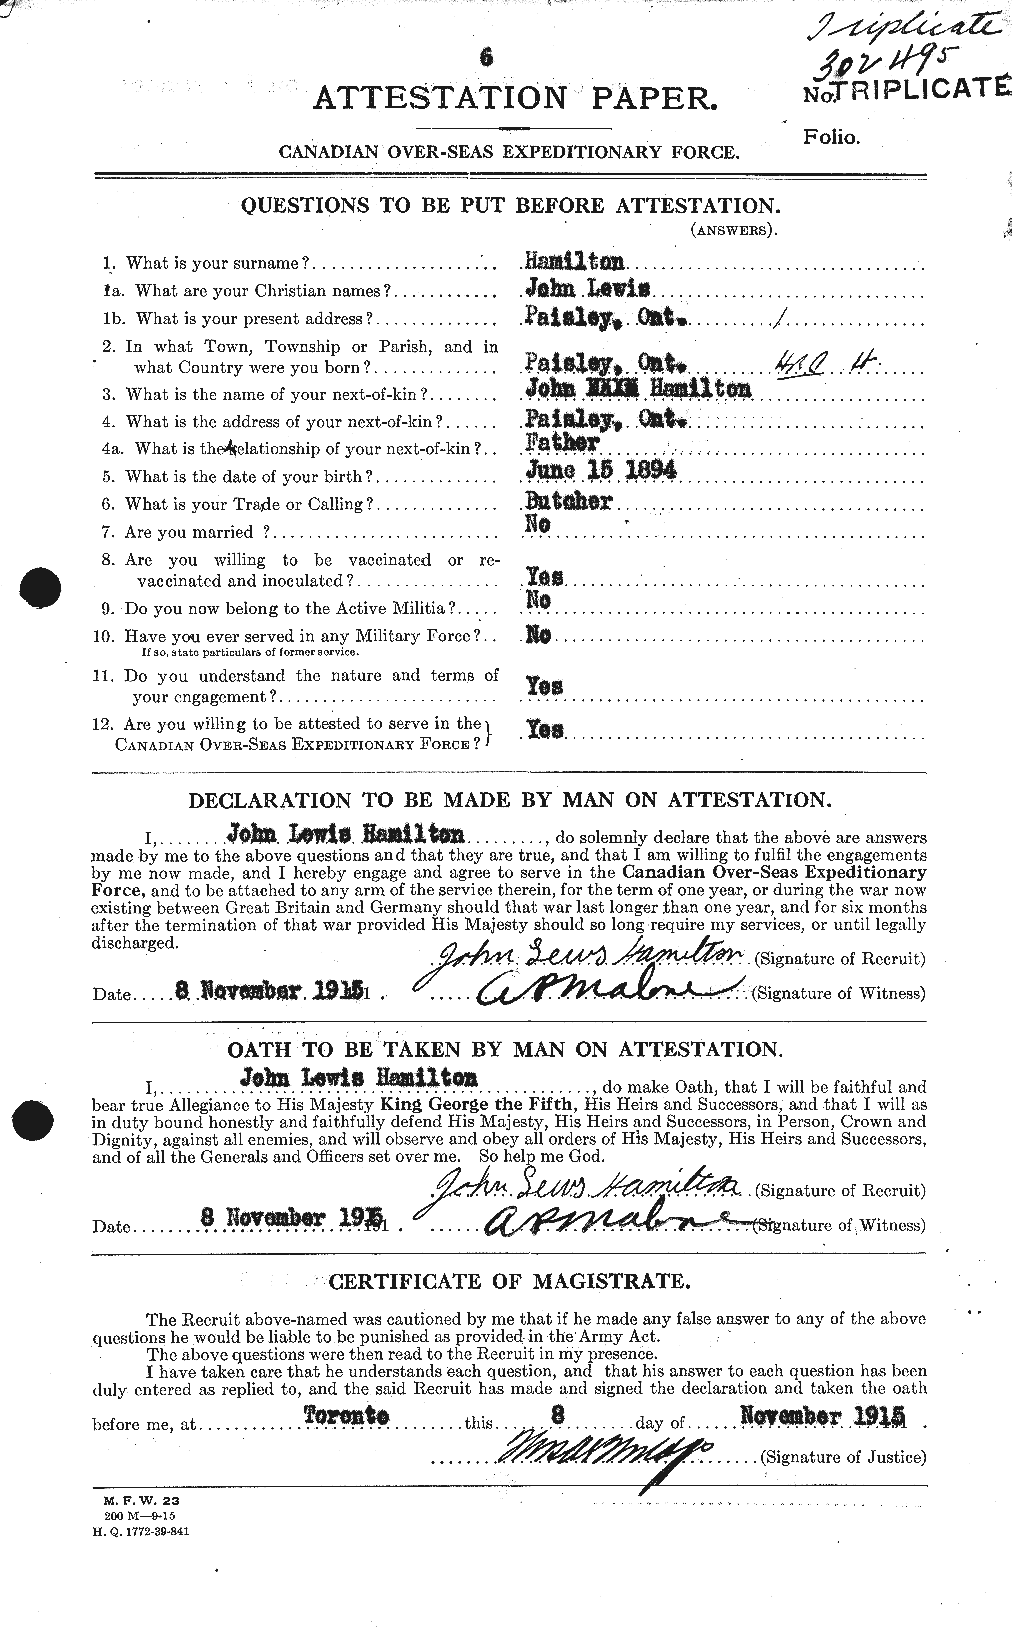 Personnel Records of the First World War - CEF 373100a